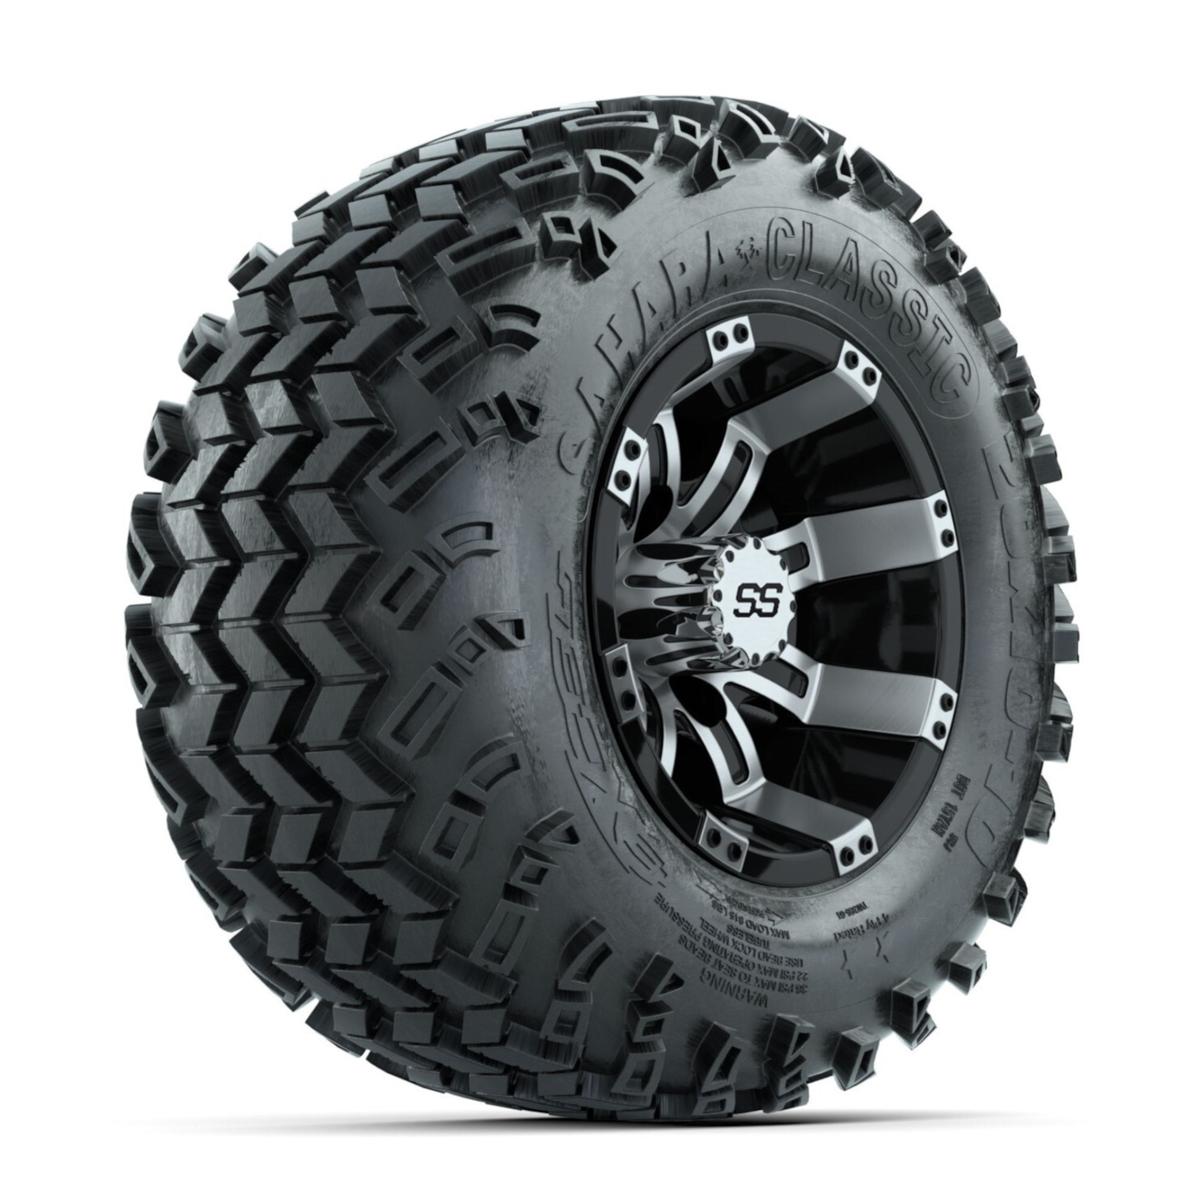 Set of (4) 10 in GTW Tempest Wheels with 20x10-10 Sahara Classic All Terrain Tires